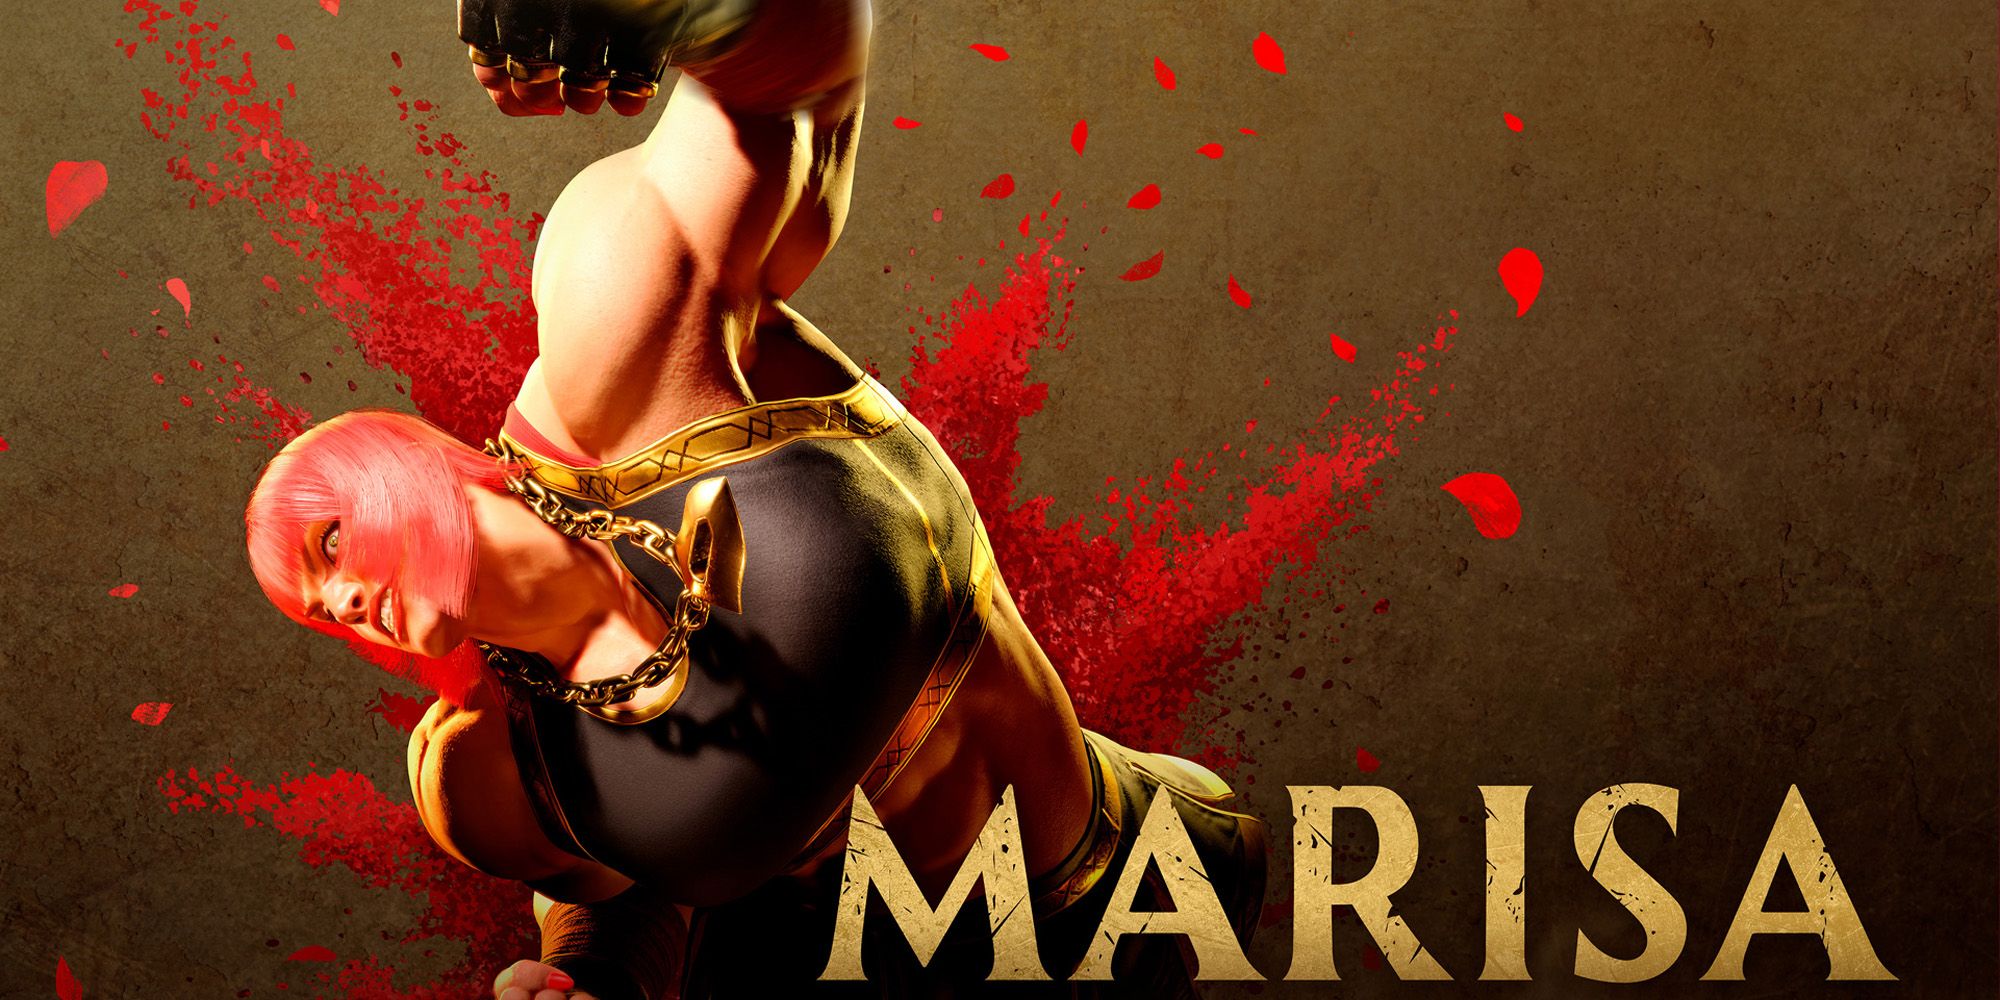 New Street Fighter 6 character Marisa, a muscular woman in a Gladiator-inspired outfit, swinging a dramatic punch.